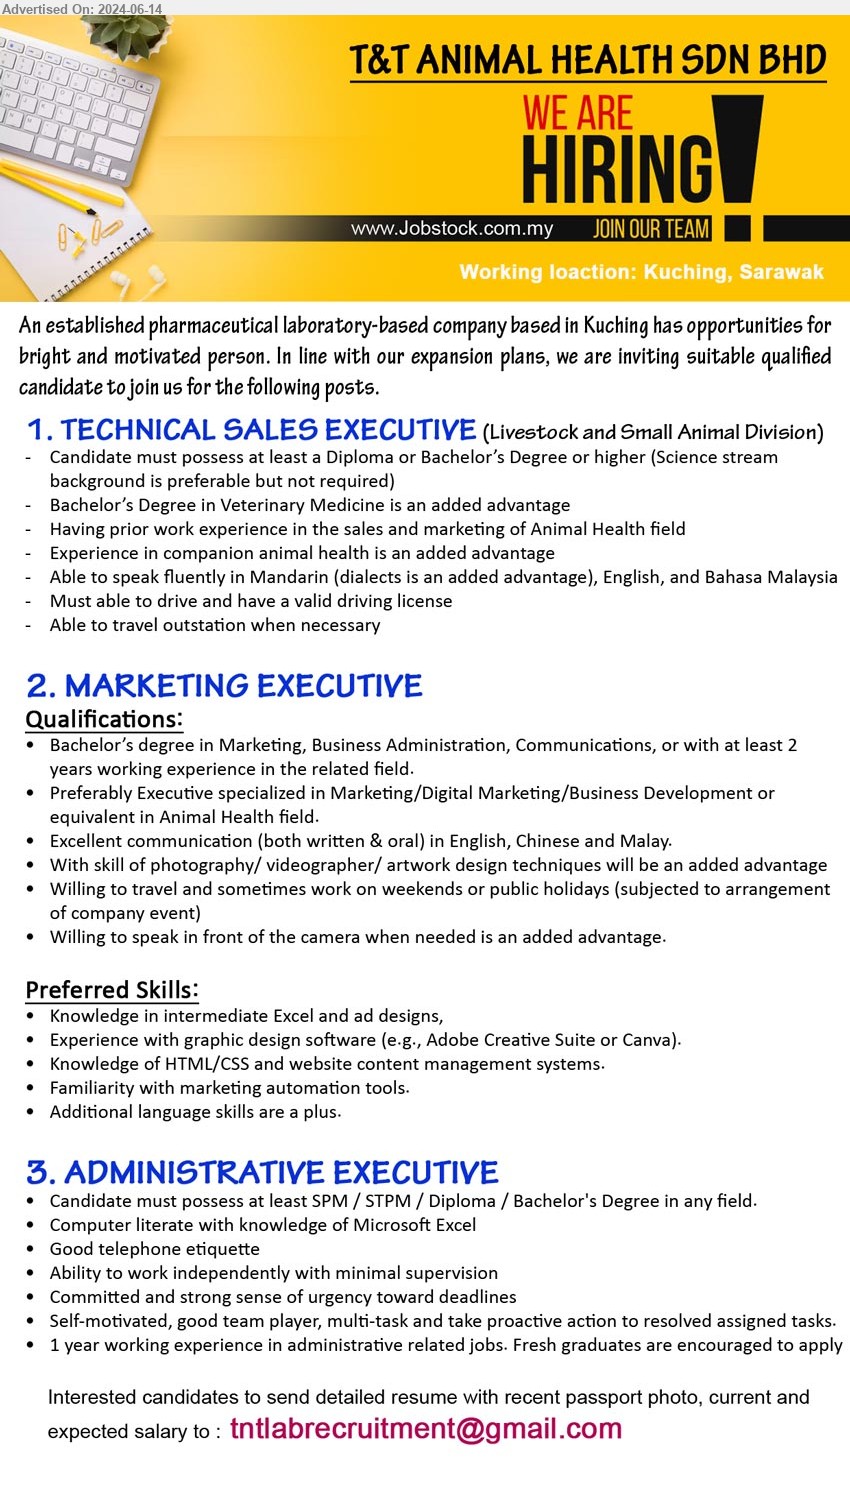 T&T ANIMAL HEALTH SDN BHD - 1. TECHNICAL SALES EXECUTIVE (Kuching), Diploma or Bachelor’s Degree or higher (Science stream background is preferable but not required), ...
2. MARKETING EXECUTIVE (Kuching), Bachelor’s Degree in Marketing, Business Administration, Communications, or with at least 2 yrs. exp., Knowledge in intermediate Excel and ad designs, Experience with graphic design software (e.g., Adobe Creative Suite or Canva)...
3. ADMINISTRATIVE EXECUTIVE (Kuching), , SPM / STPM / Diploma / Bachelor's Degree, Computer literate with knowledge of Microsoft Excel..
Email resume to ...